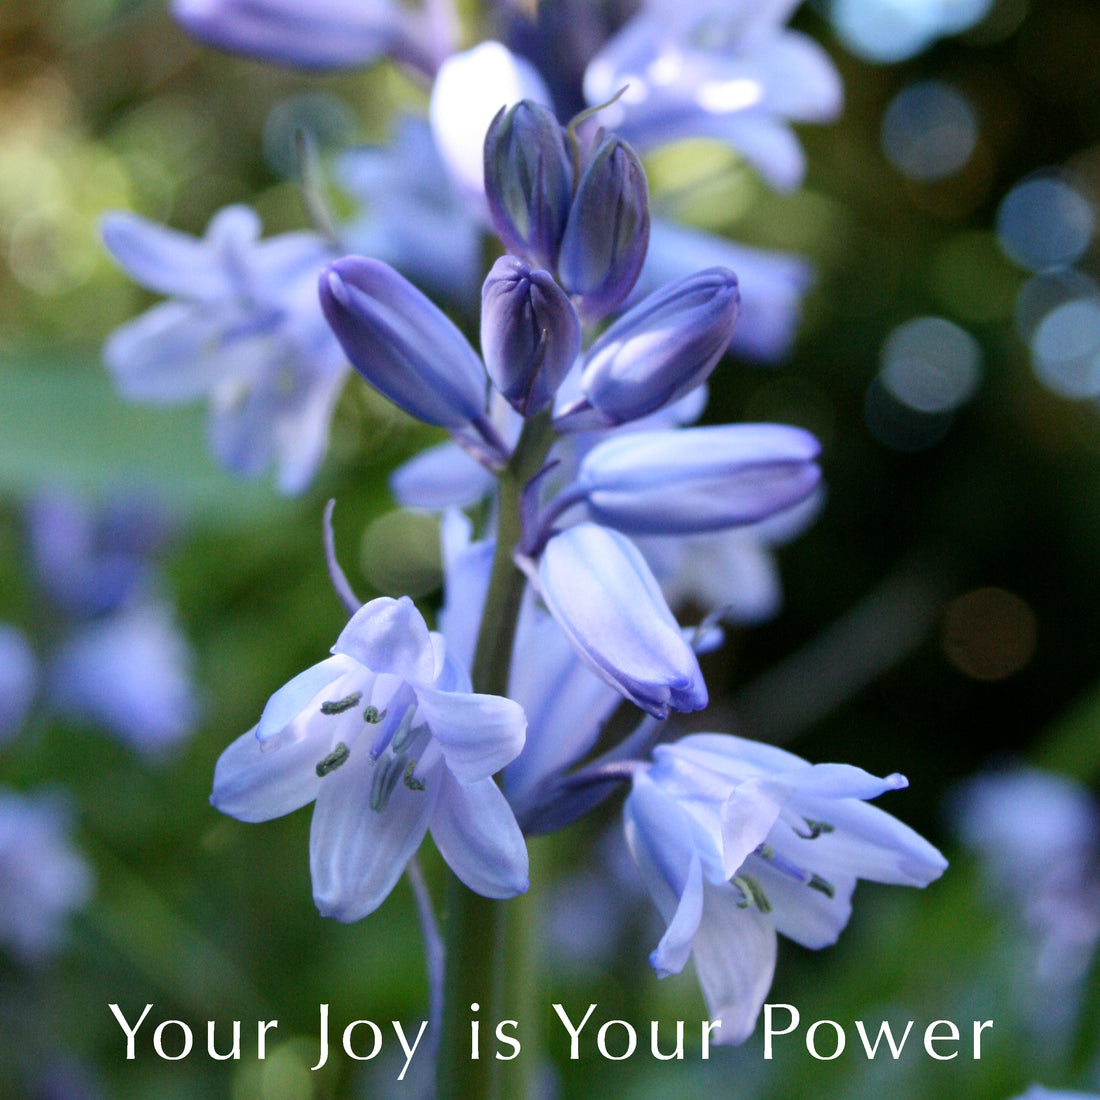 Your Joy is Your Power